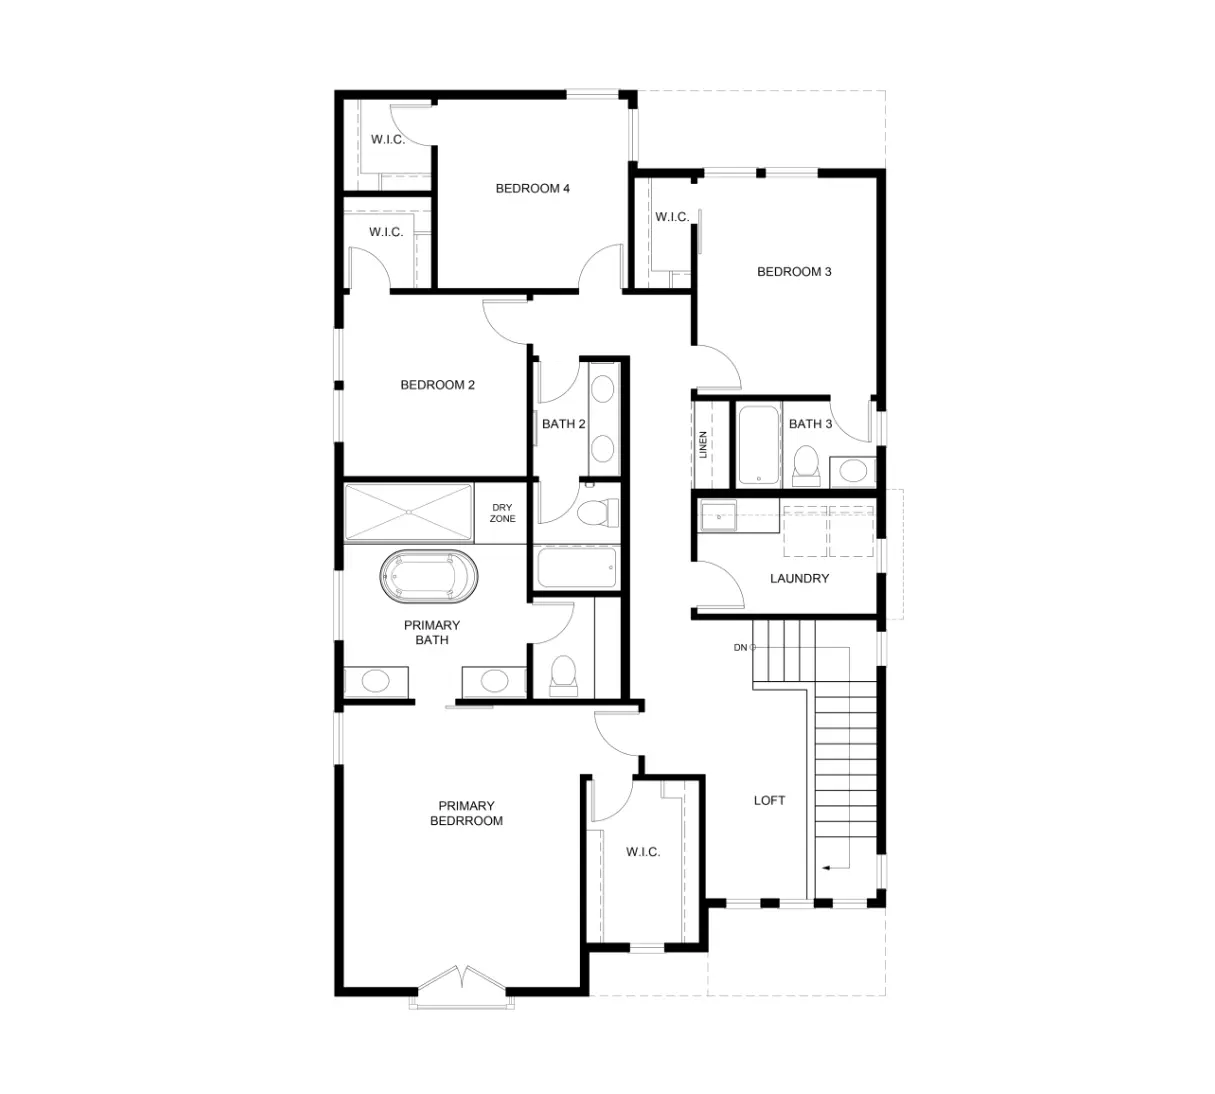 Second floor of the 2A Floor Plan of Enclave at Walnut Boulevard in Walnut Creek designed and built by boutique homebuilders, Haven Development